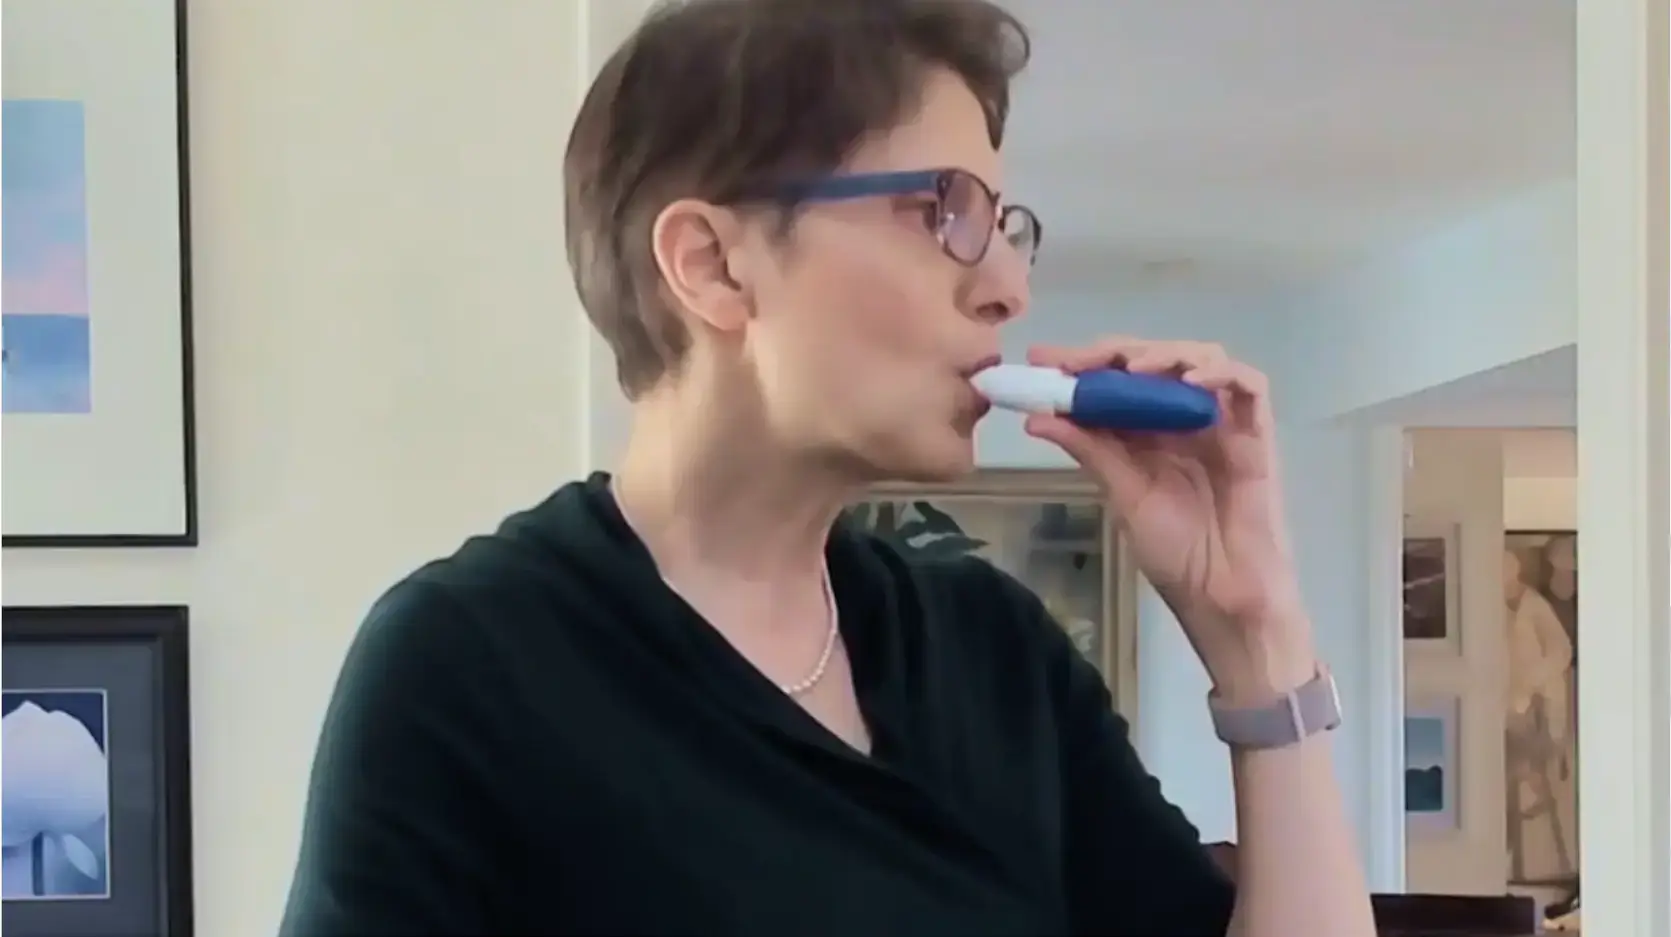 A woman with glasses holds the INBRIJA inhaler to her mouth. Text on the bottom right of image reads "Bettina’s Story"